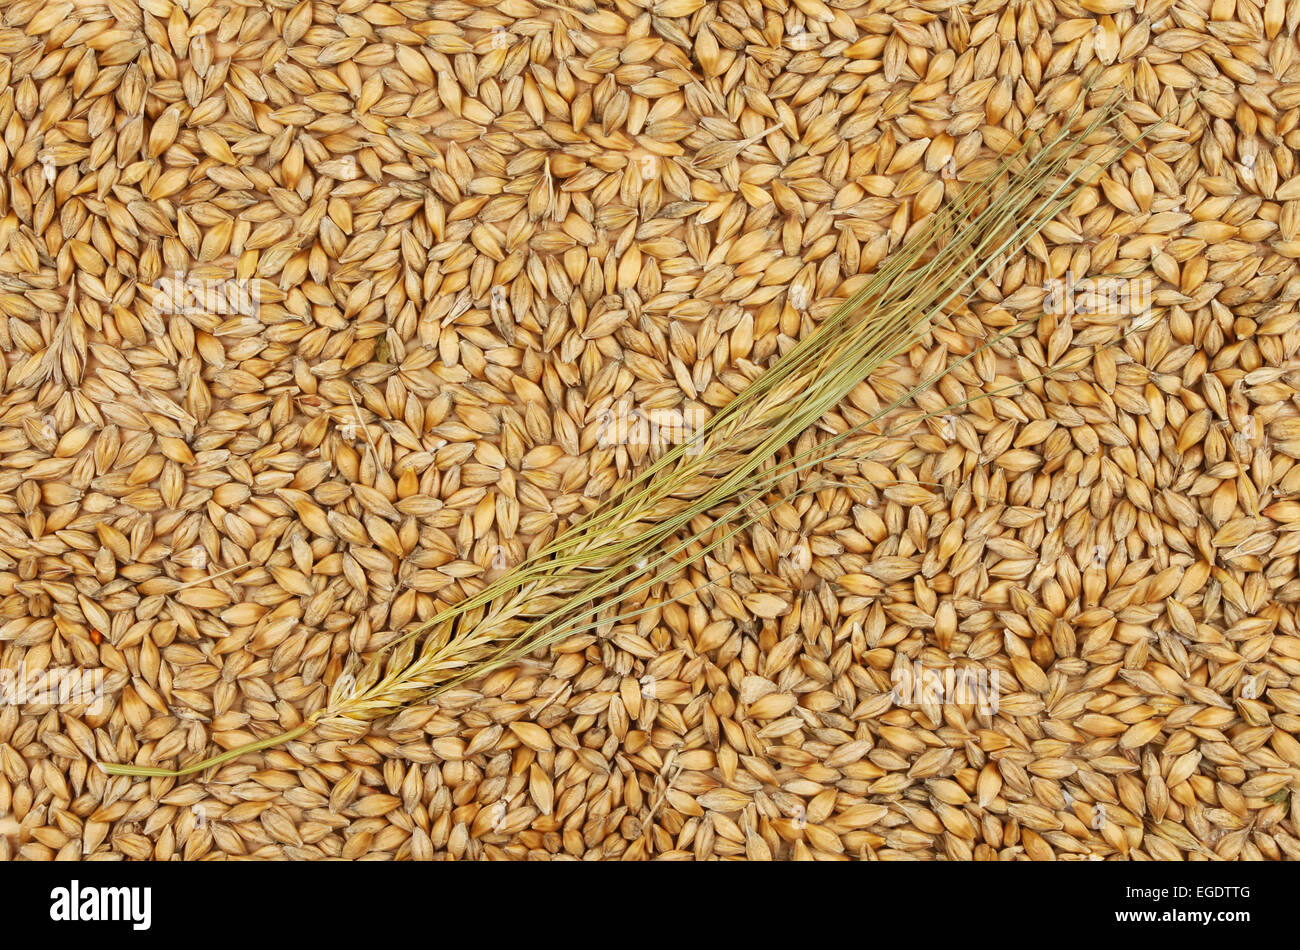 Ear of barley on a background of barley grains Stock Photo